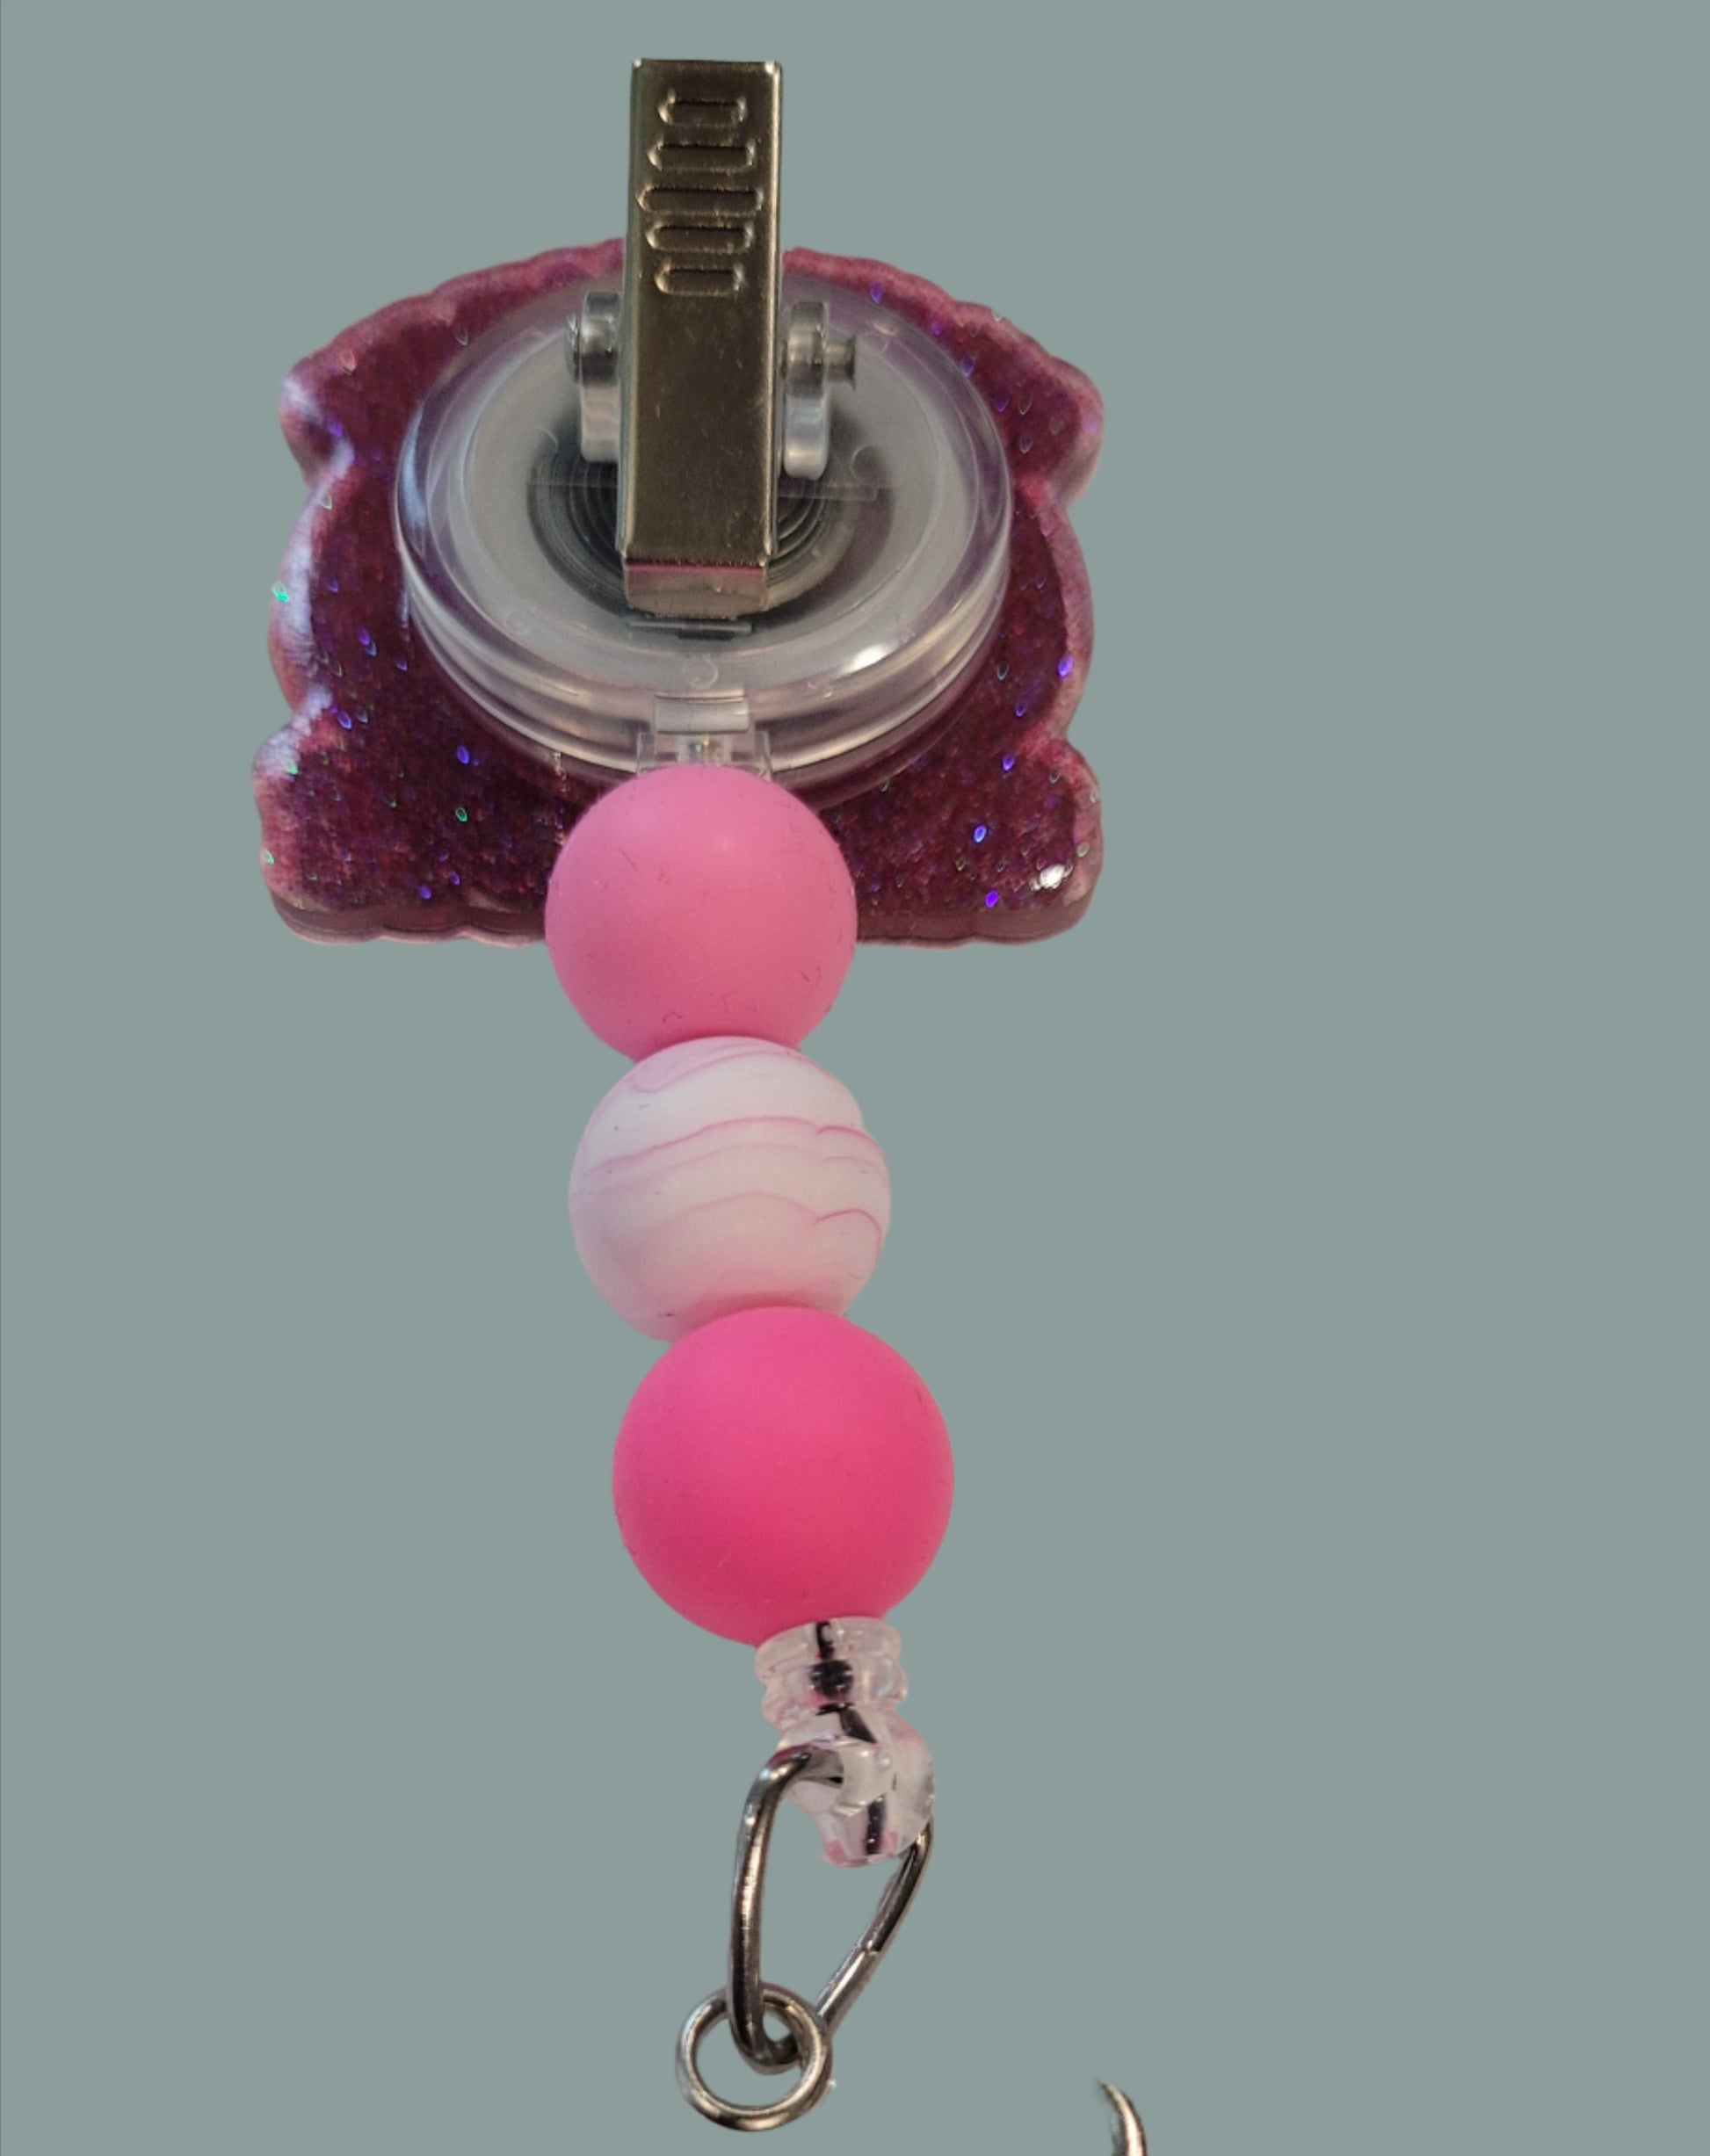 Well this could go 1 of 2 ways. Either heading to the kitchen to Stir The Pot or your on the way to cause some trouble and Stir the Pot that way. Either way this cute acrylic badge reel features a pink glitter back and 3 color coordinated silicone beads.